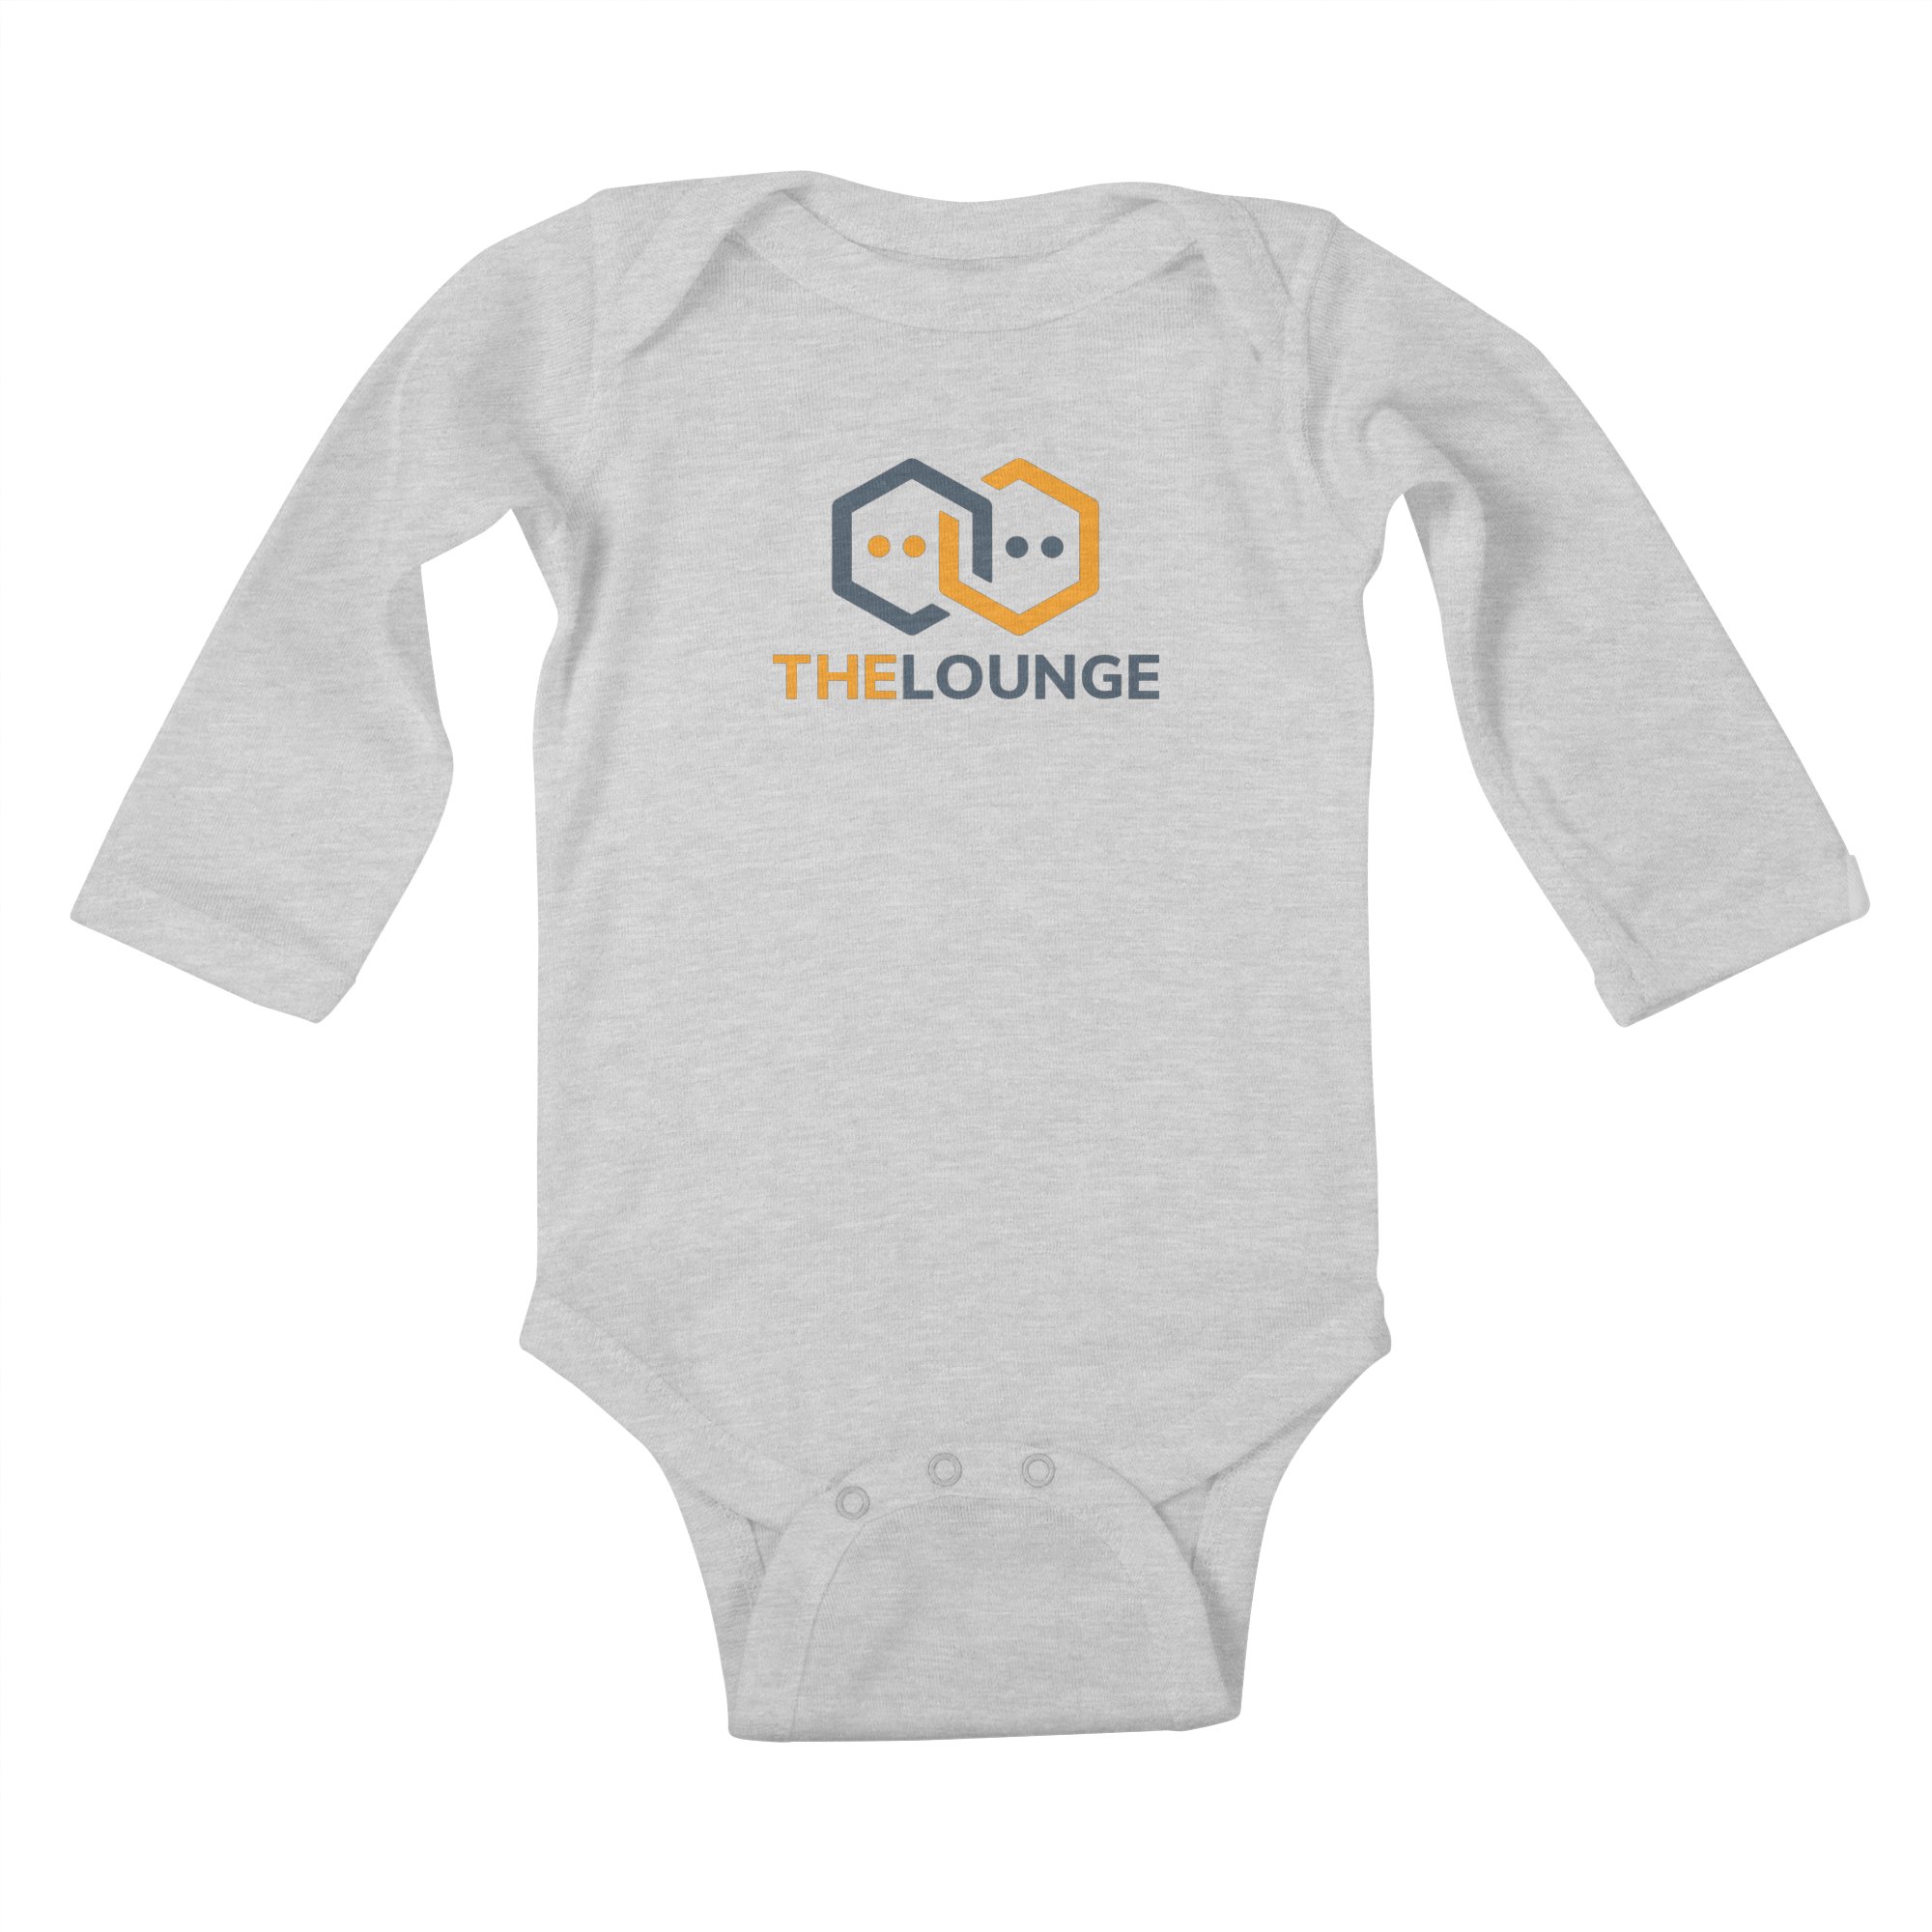 Grey baby bodysuit with The Lounge logo